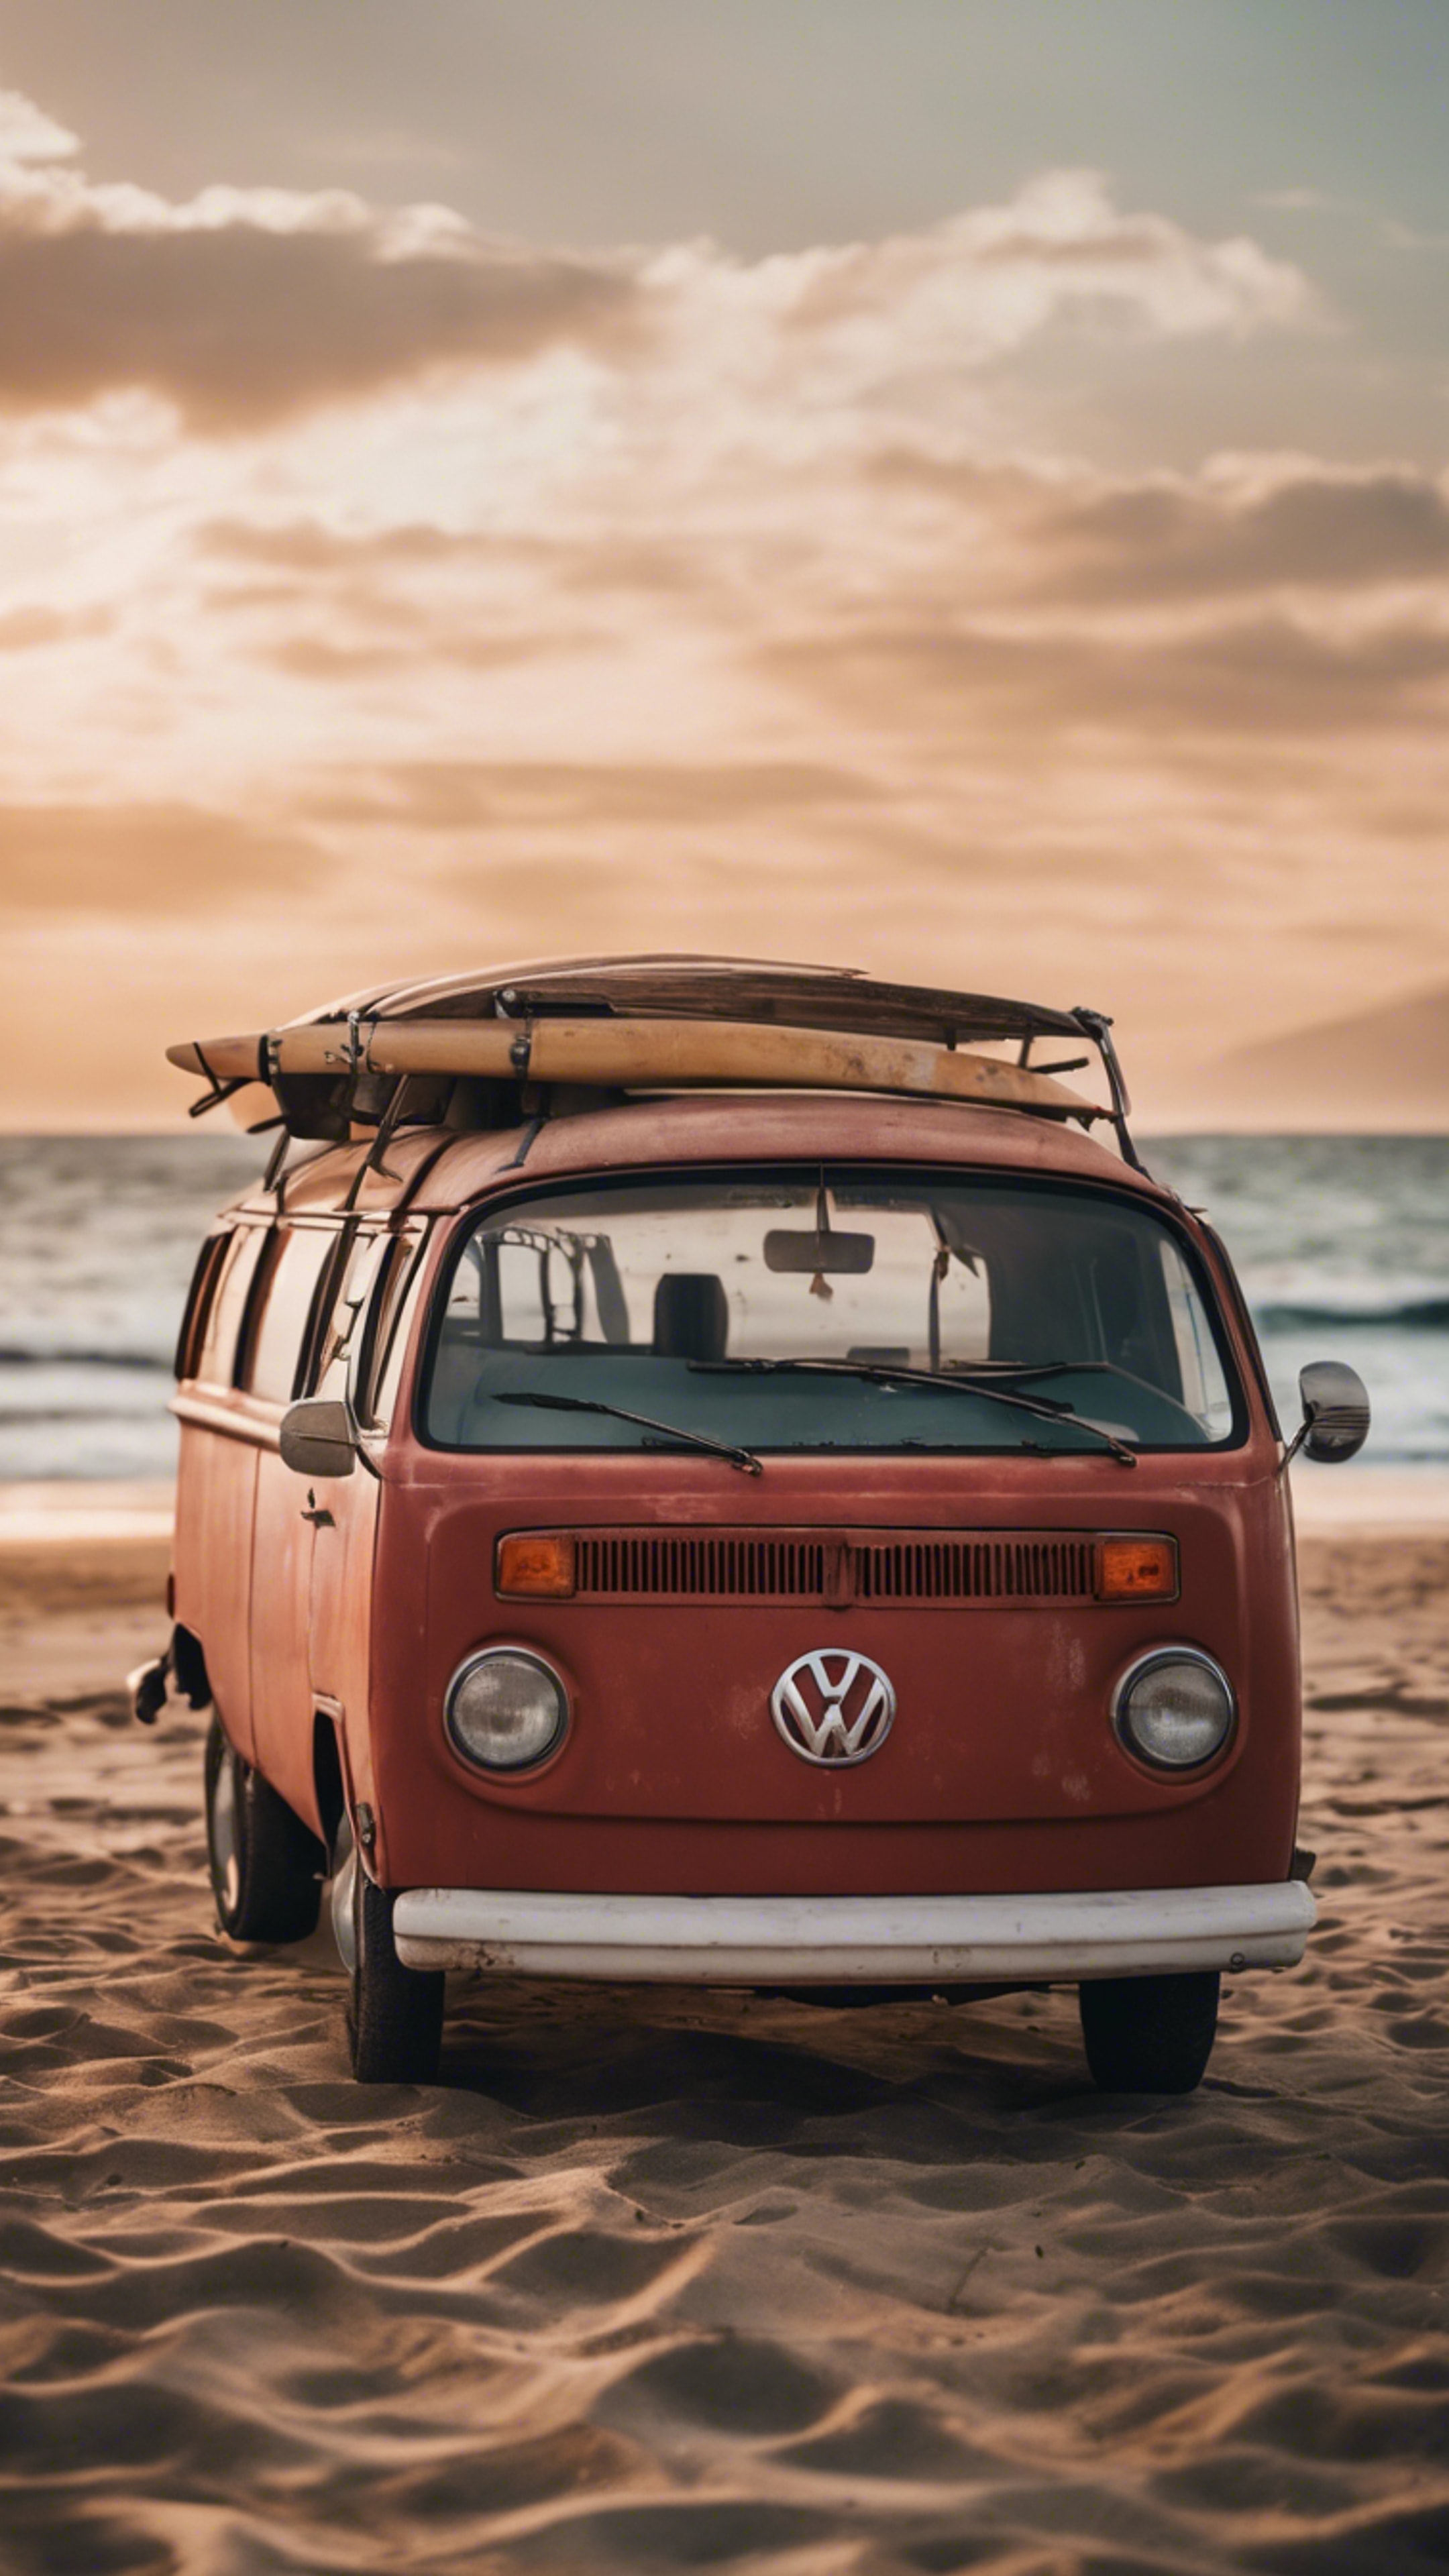 An old, rusted red Volkswagen van parked at a beach with the sunset in the backdrop, surfboards leaning against it. Behang[f96813b3e584499cadbf]